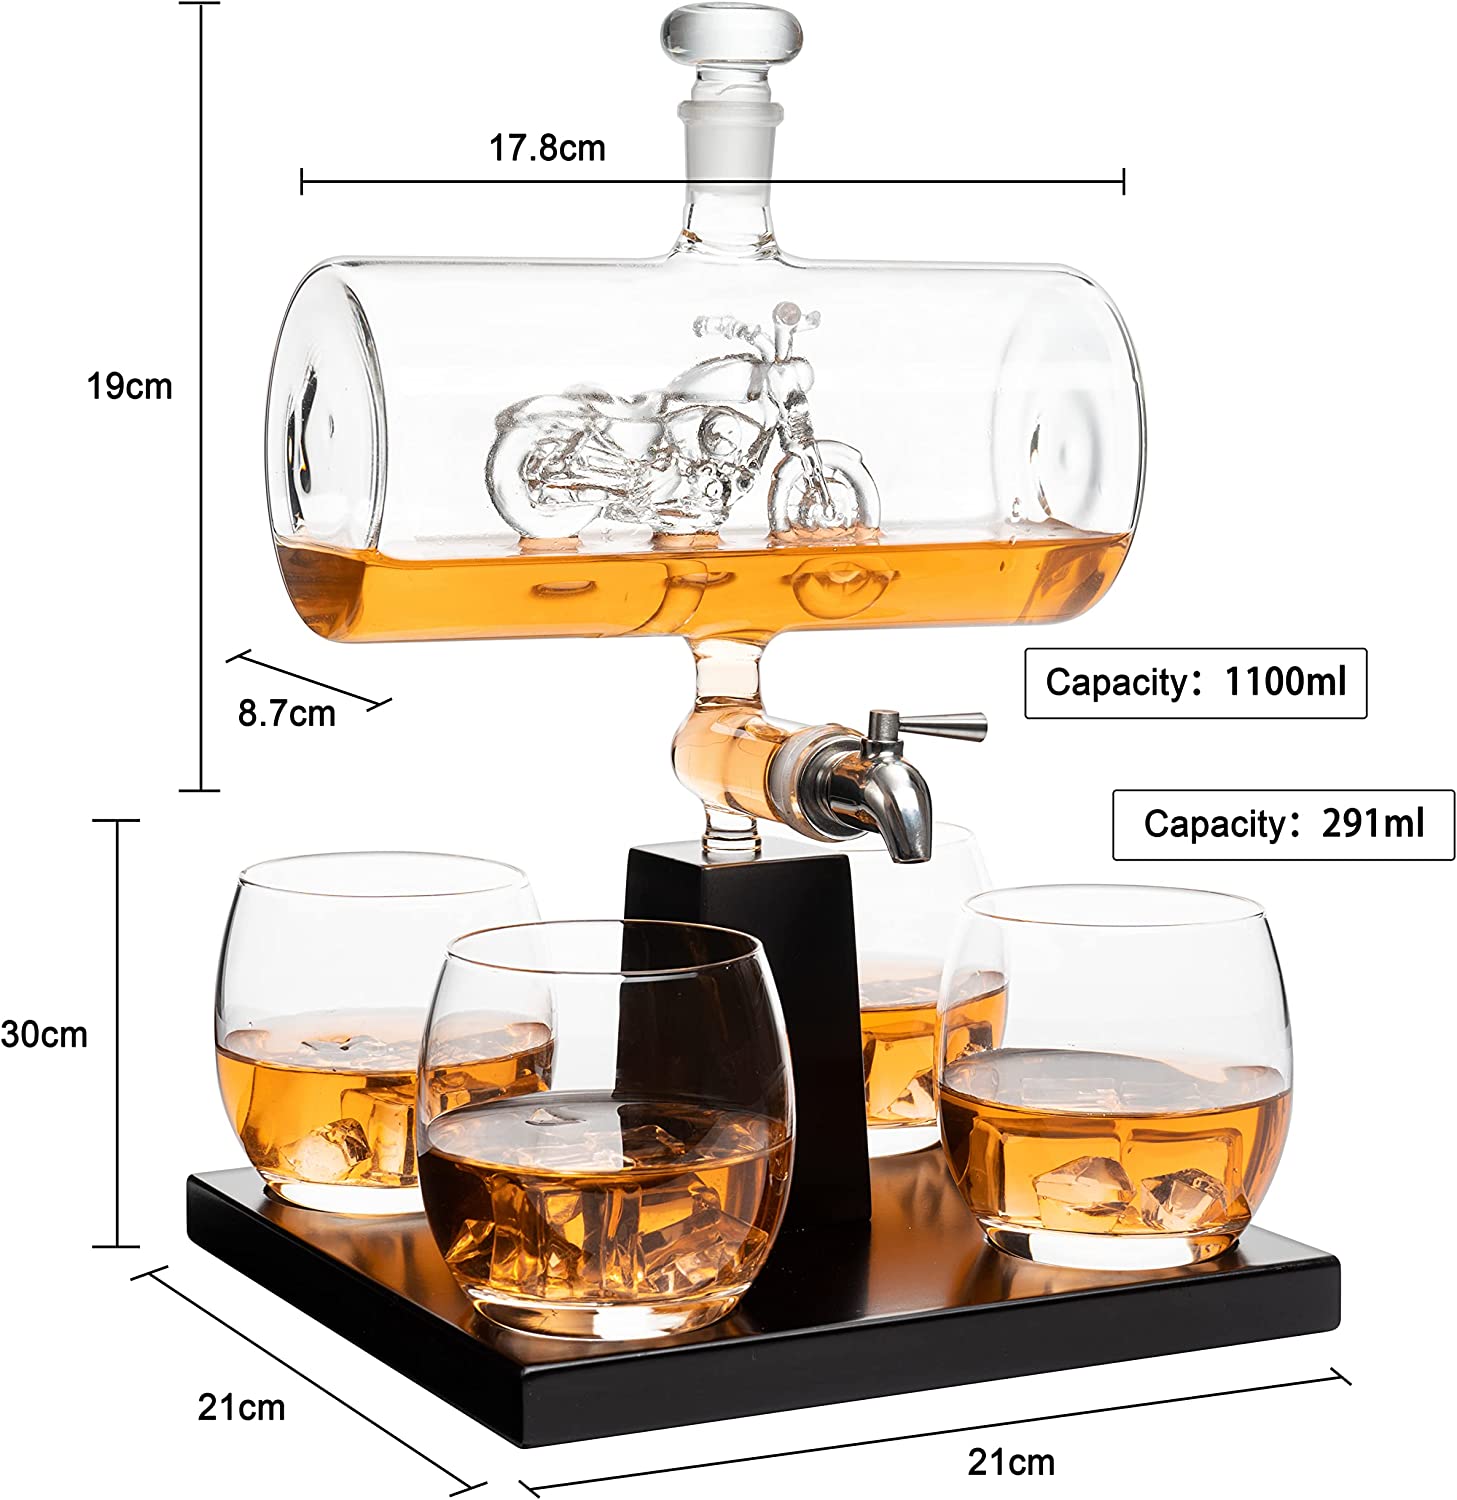 Motorcycle Decanter Whiskey & Wine Decanter Set 1100ml by The Wine Savant with 4 Whiskey Glasses, Motorcycle Gifts, Harley Davidson Motorbike Gifts, Drink Dispenser for Wine, Scotch, Bourbon 19